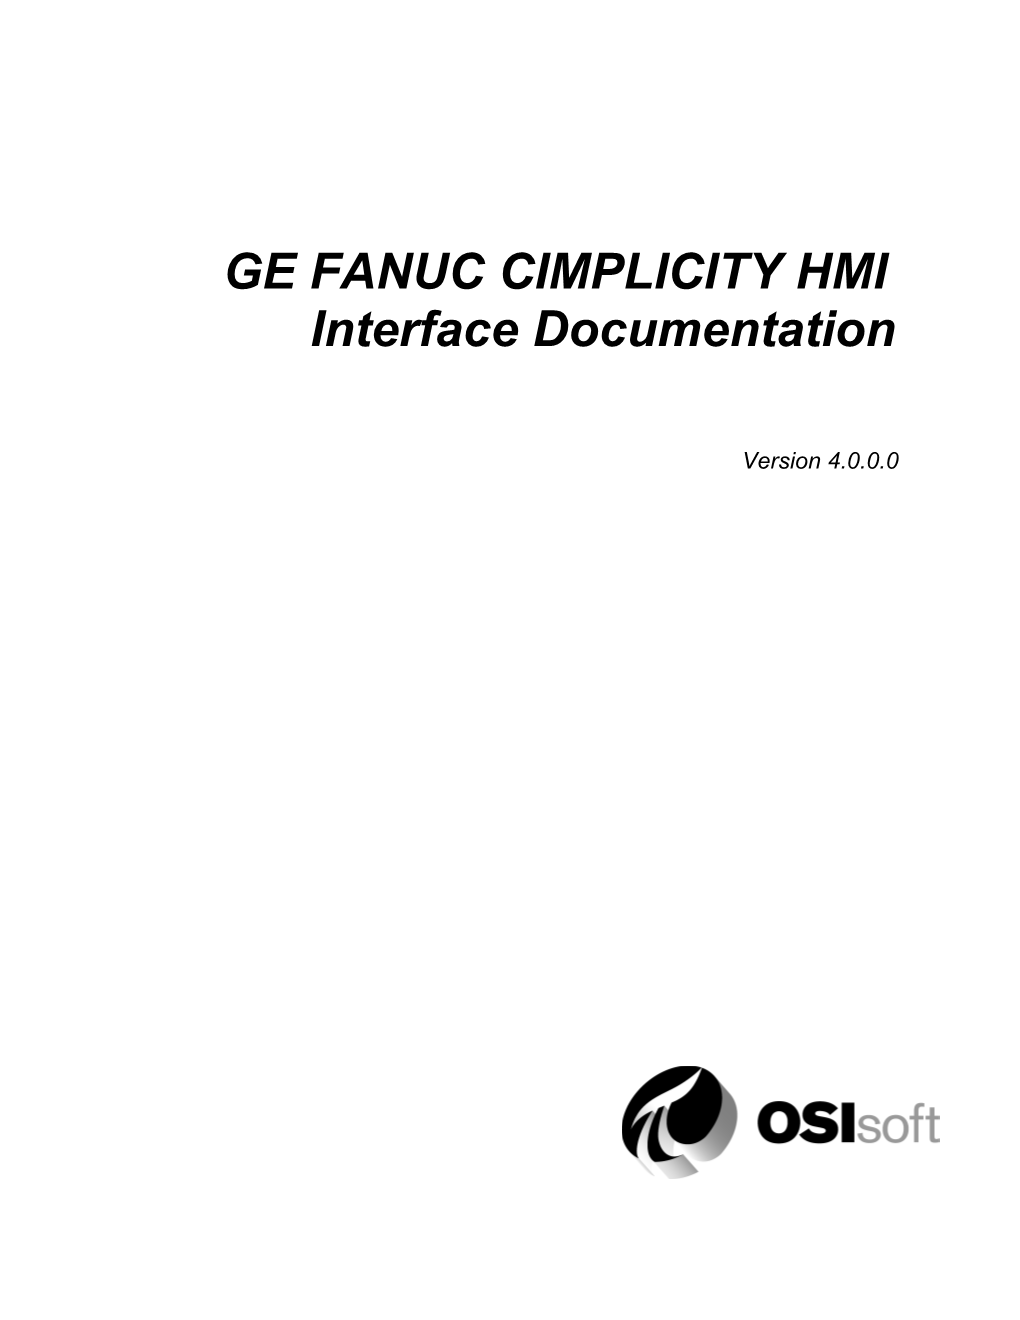 GE FANUC CIMPLICITY HMI Interface to the PI System